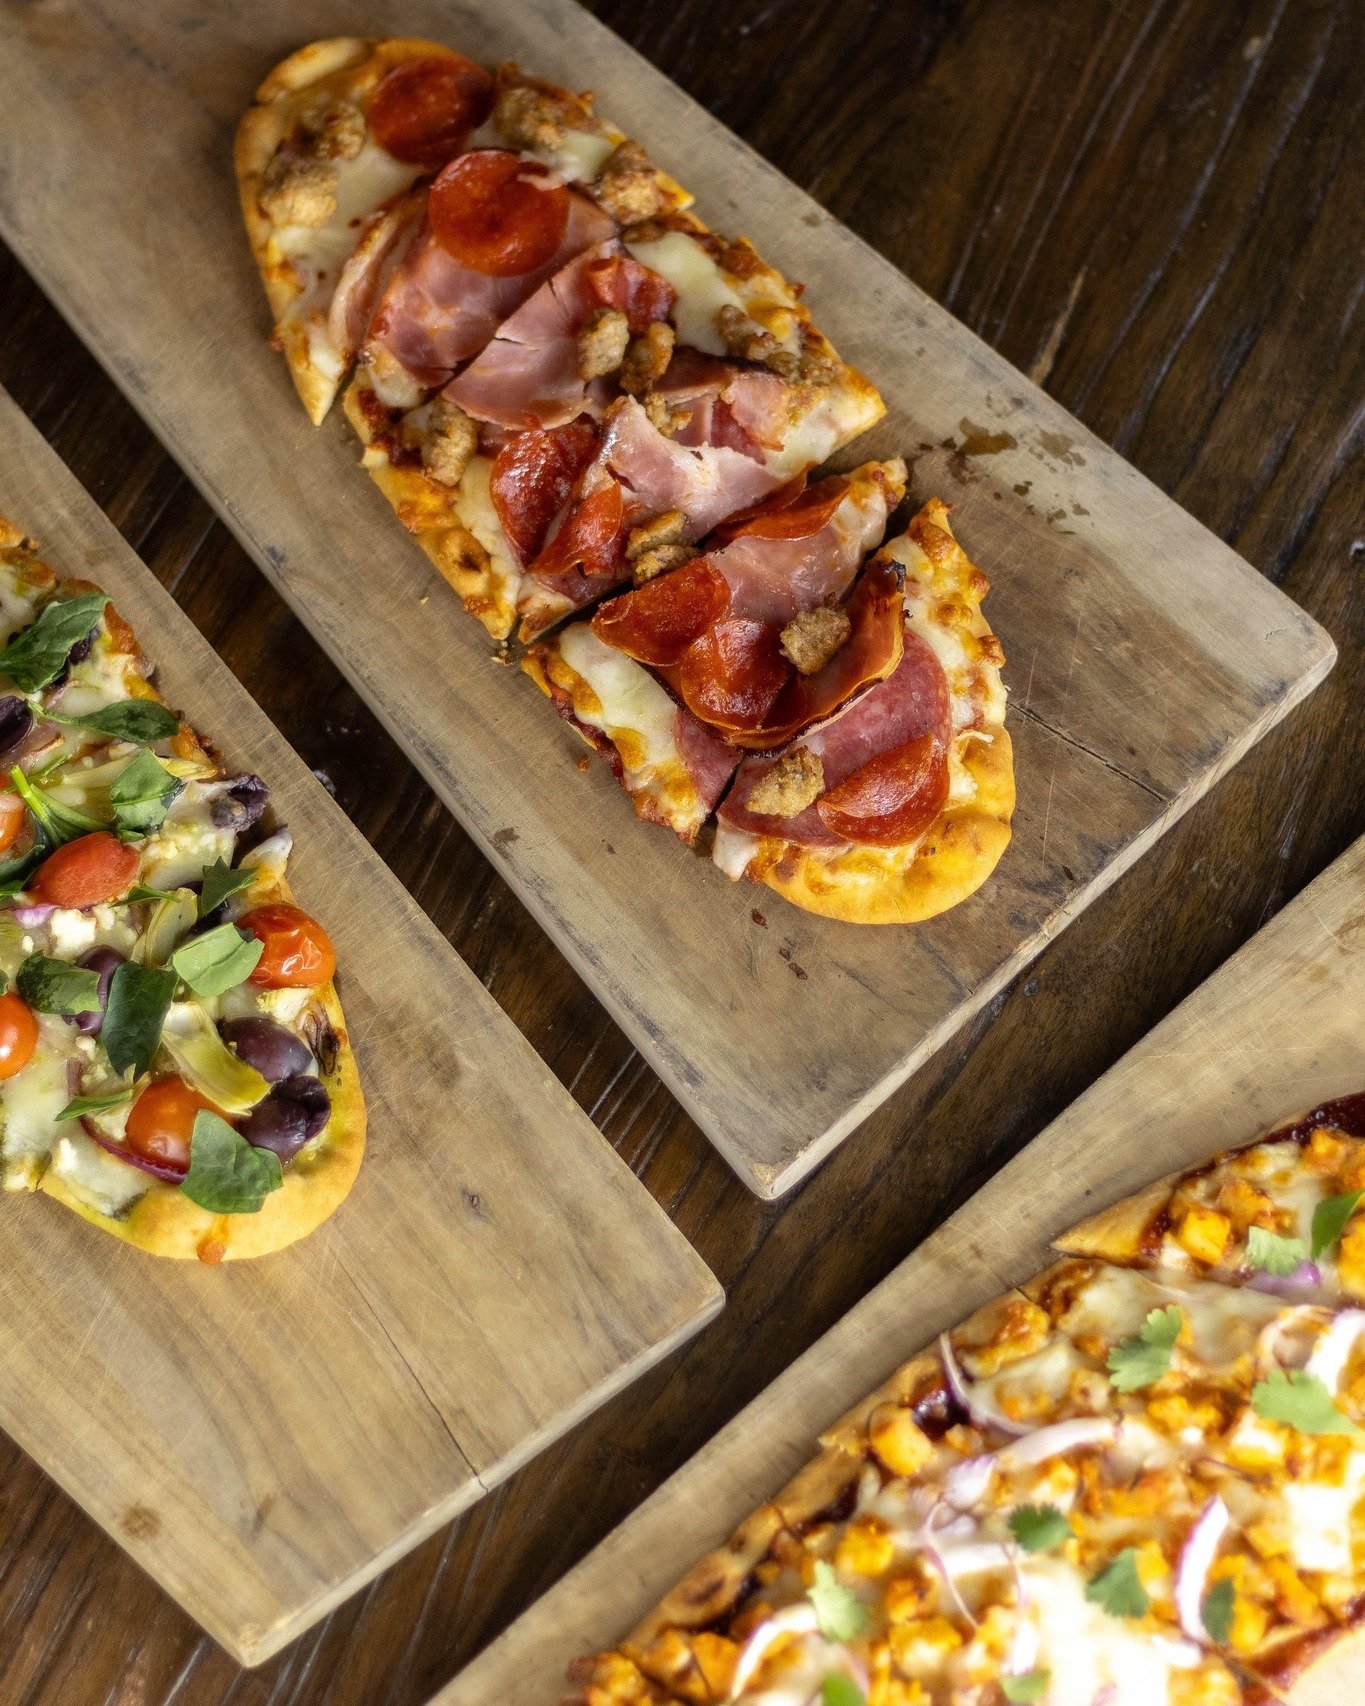 We're rotating a chef's special flatbread &ndash; for a limited time, order the Meat Lover's flatbread with sausage, pepperoni, ham, salami, marinara &amp; cheese. Make sure to try our new mediterranean &amp; BBQ chicken flatbreads too! 🍕